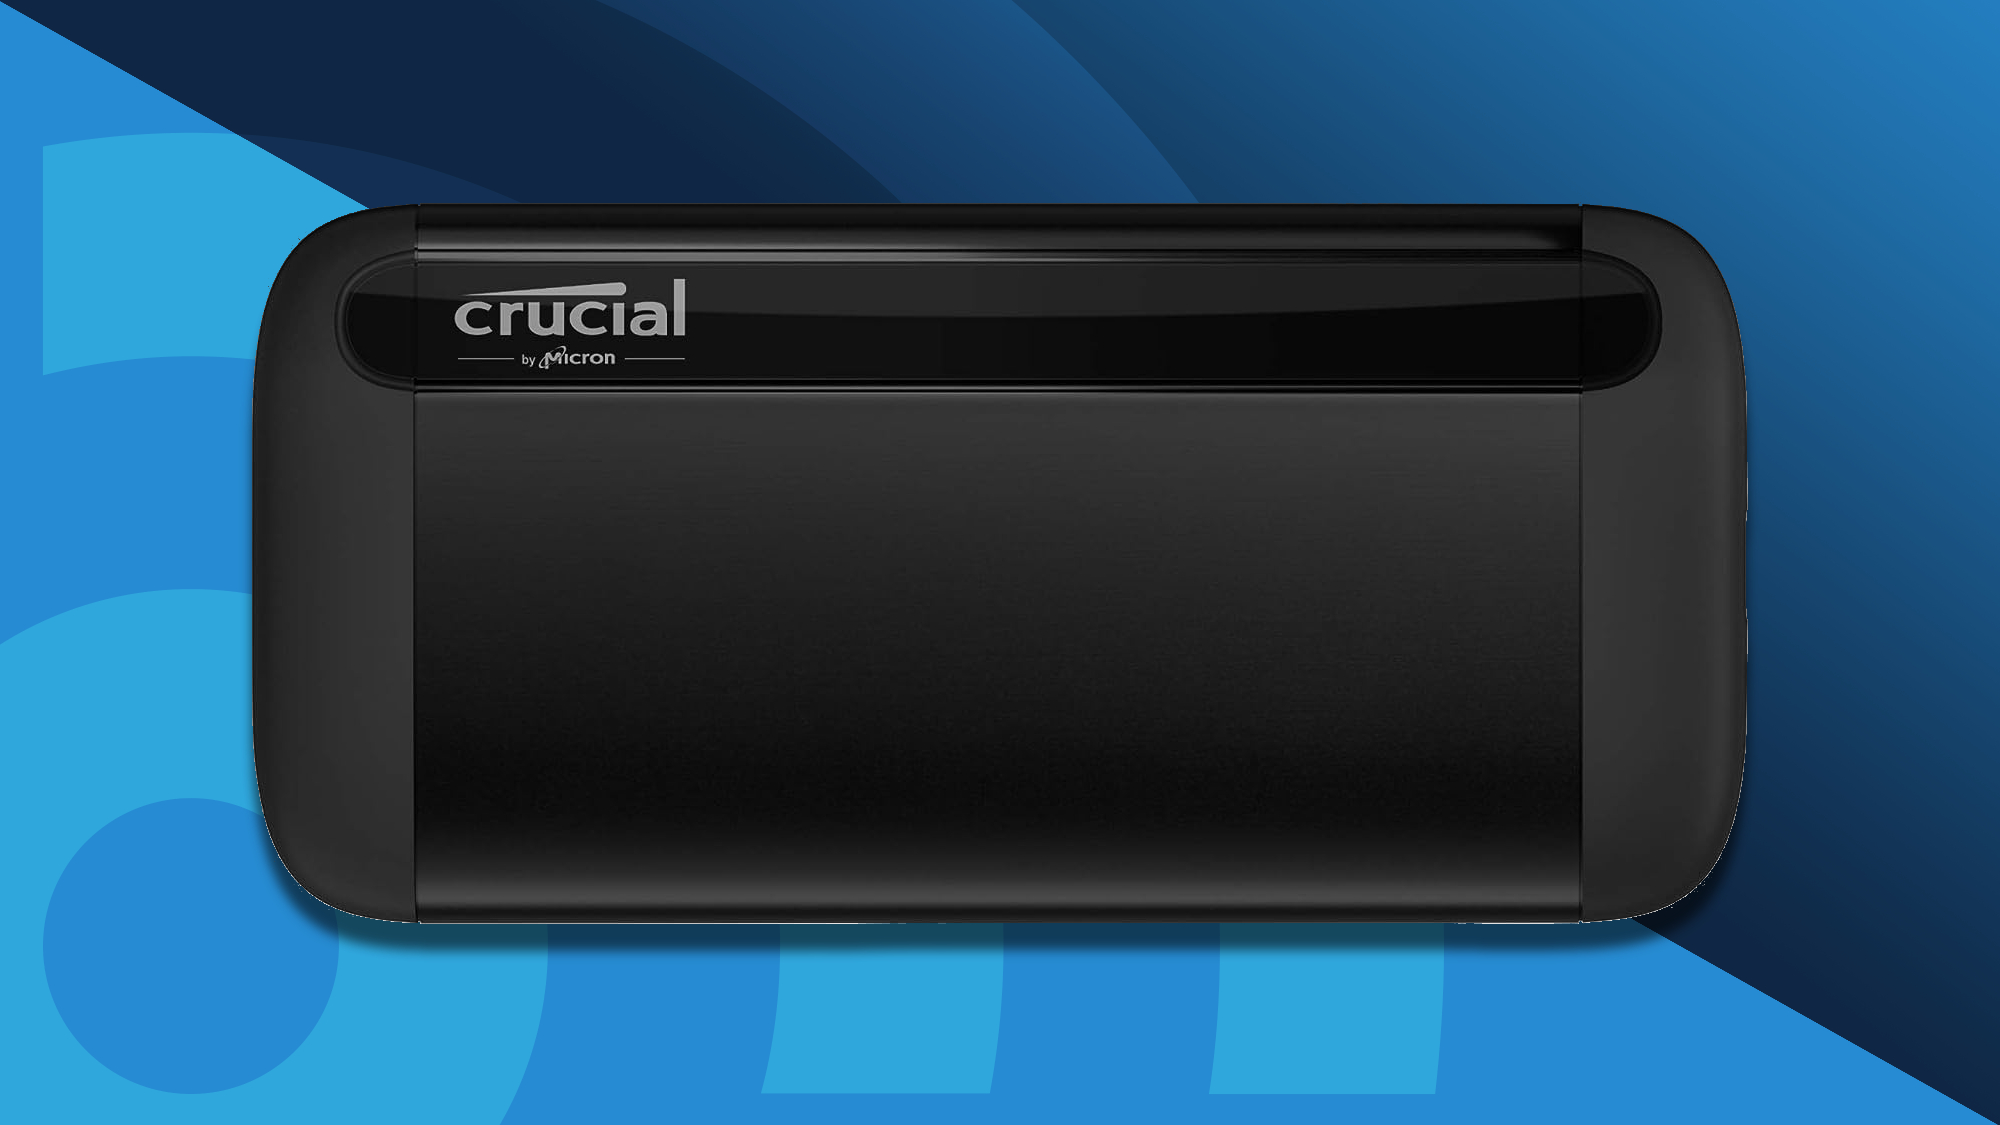 How to use your Crucial Portable SSD with your Playstation 4